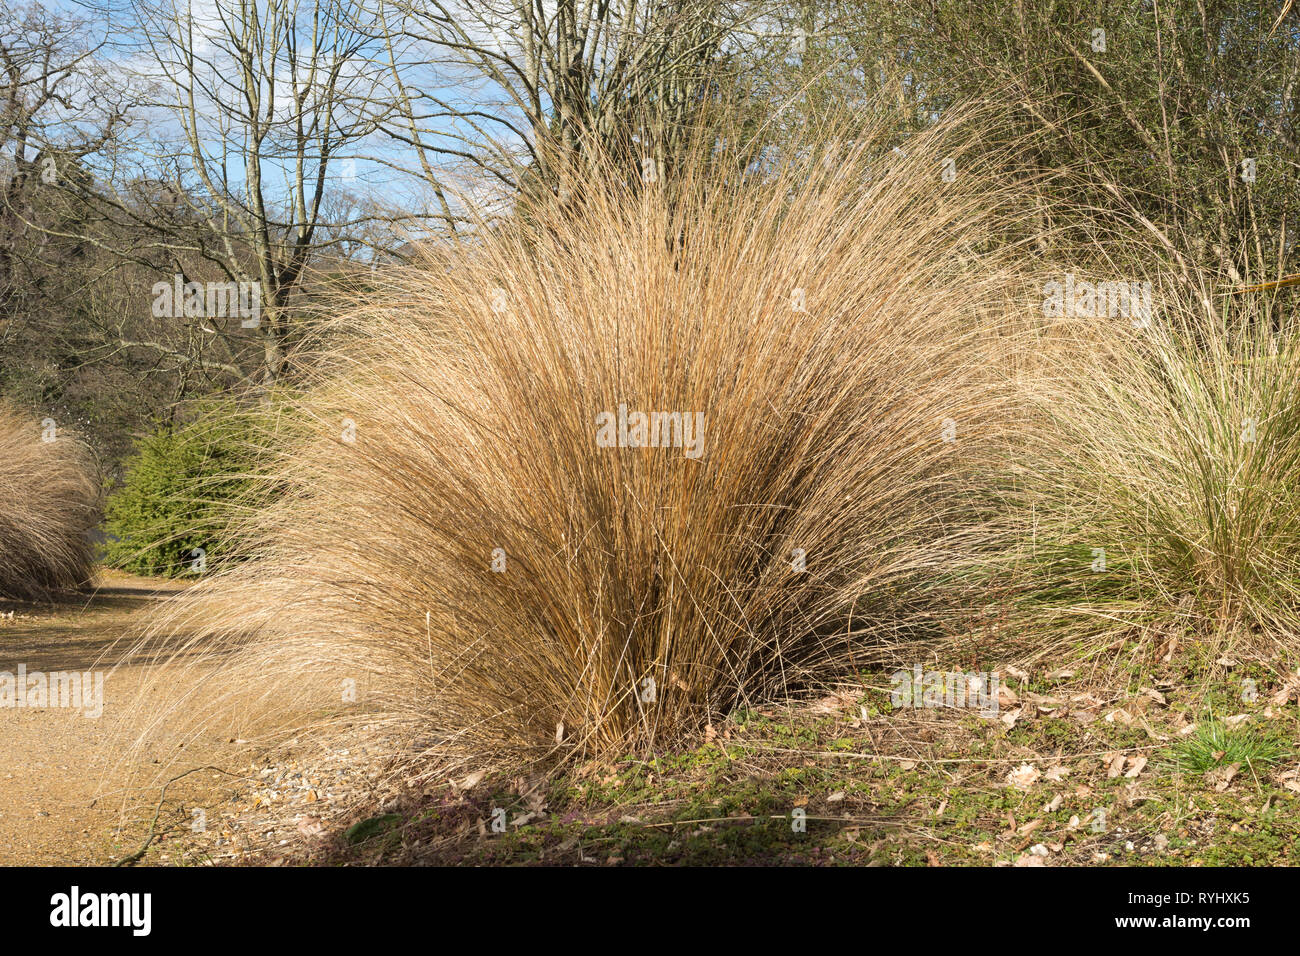 Chionochloa rubra, red tussock grass, a New Zealand endemic plant growing in a UK garden Stock Photo